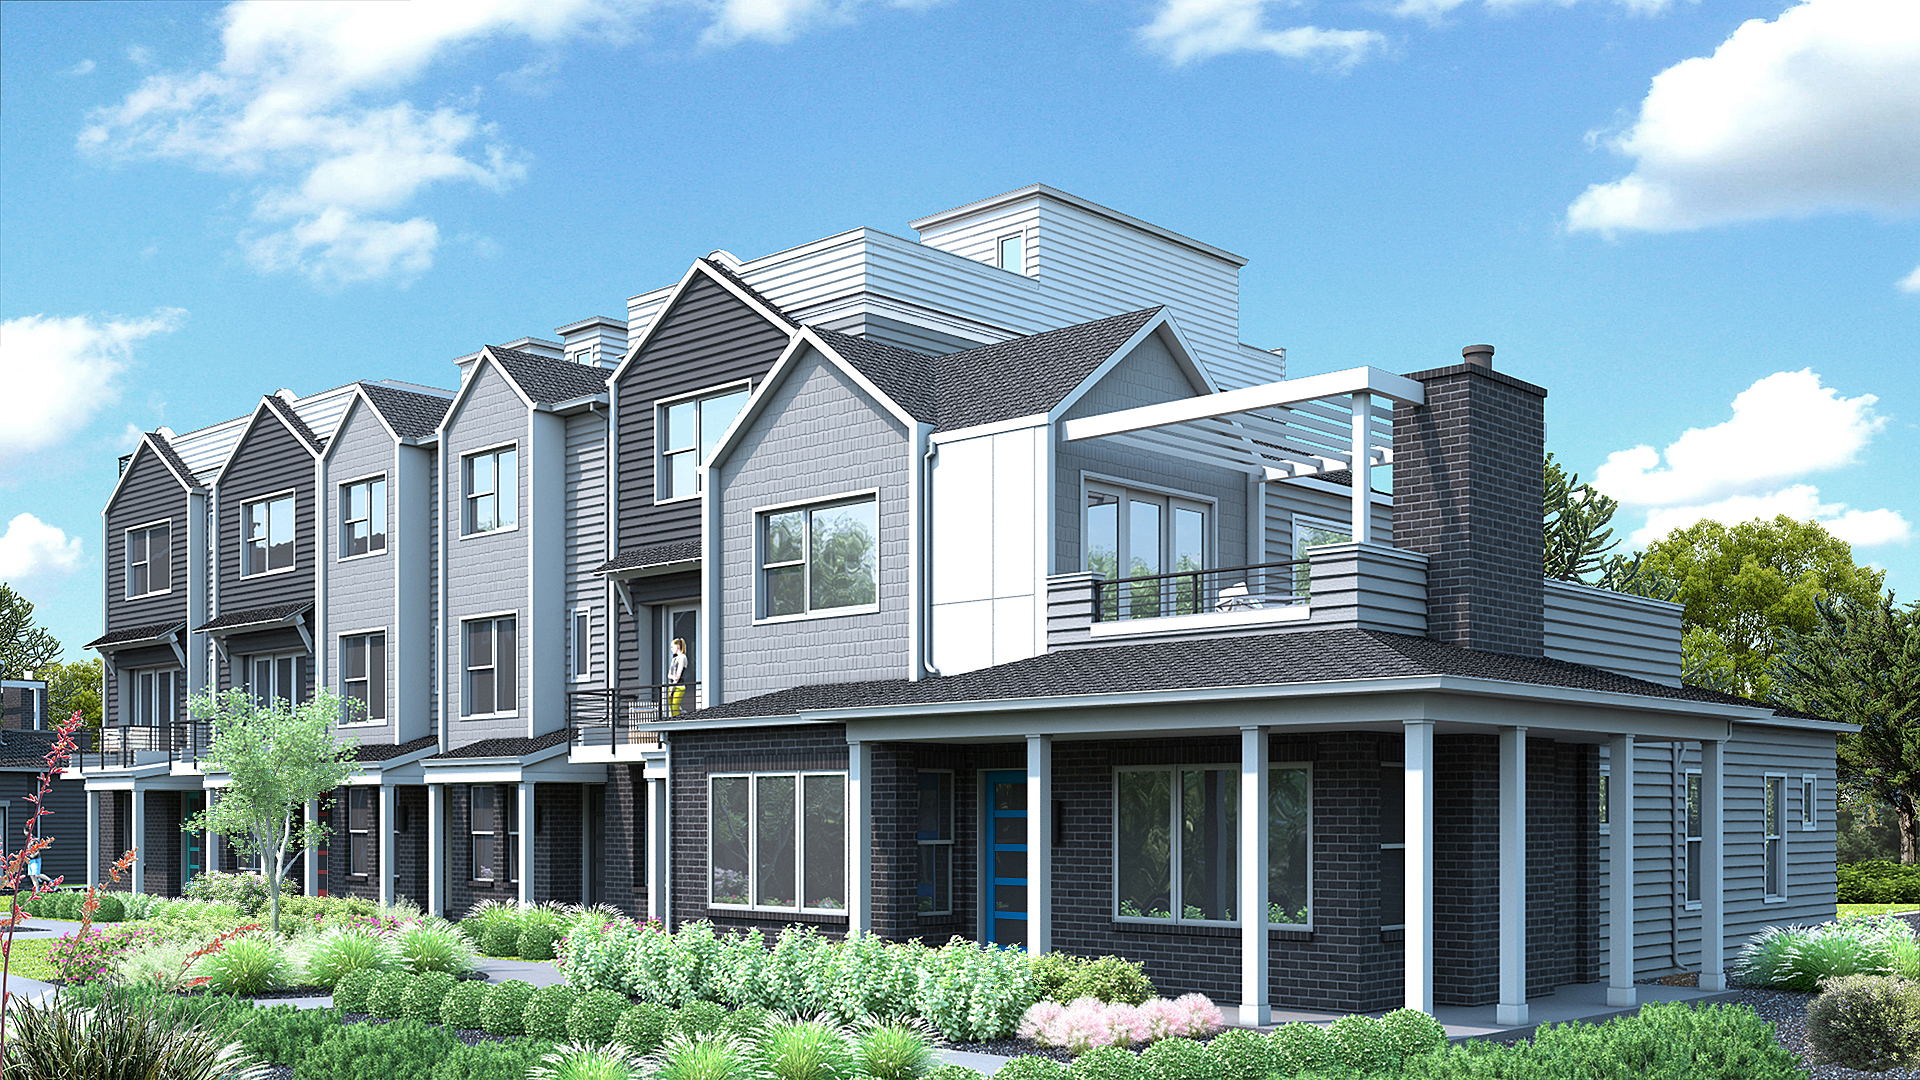 Townhome exterior rendering